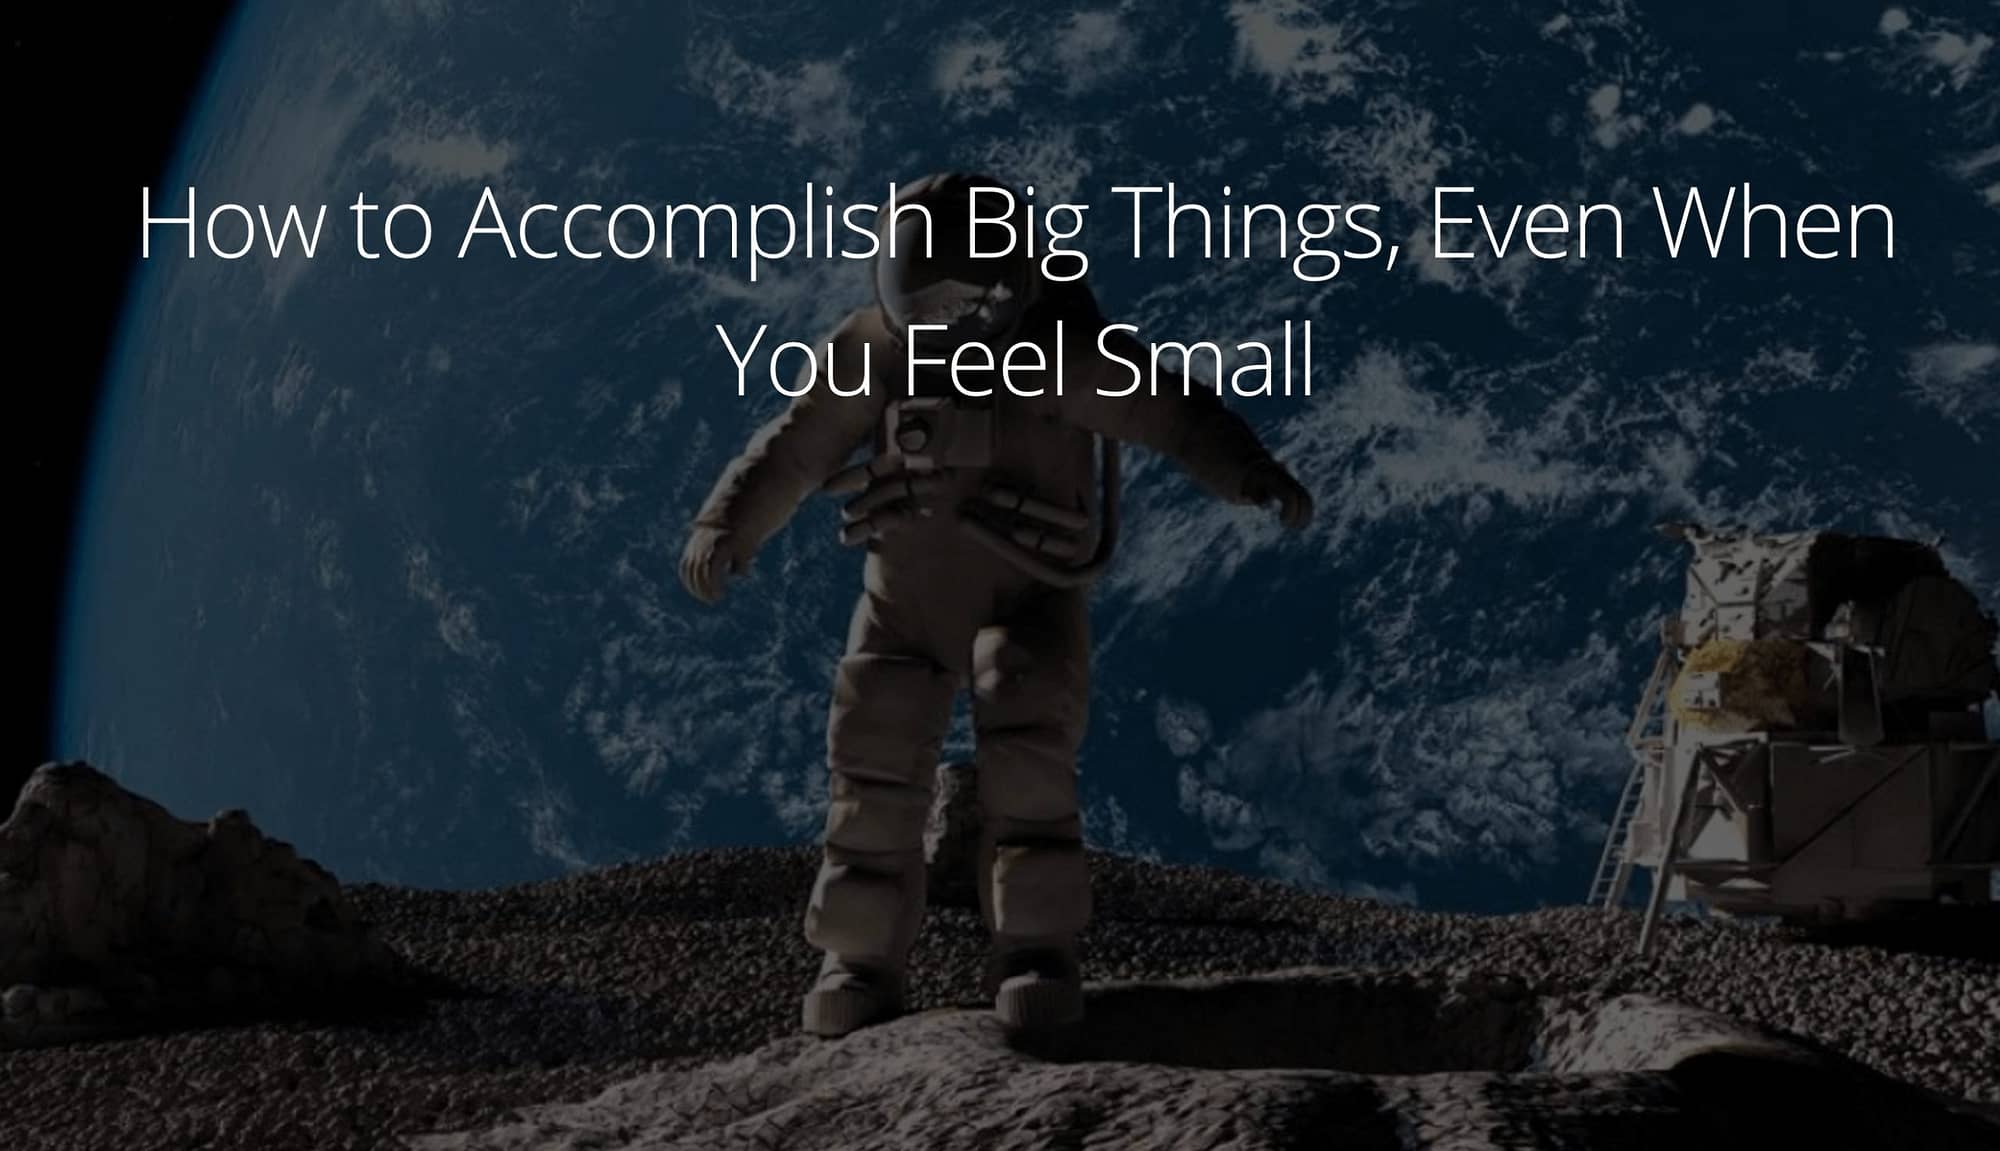 How to accomplish big things even when you feel small